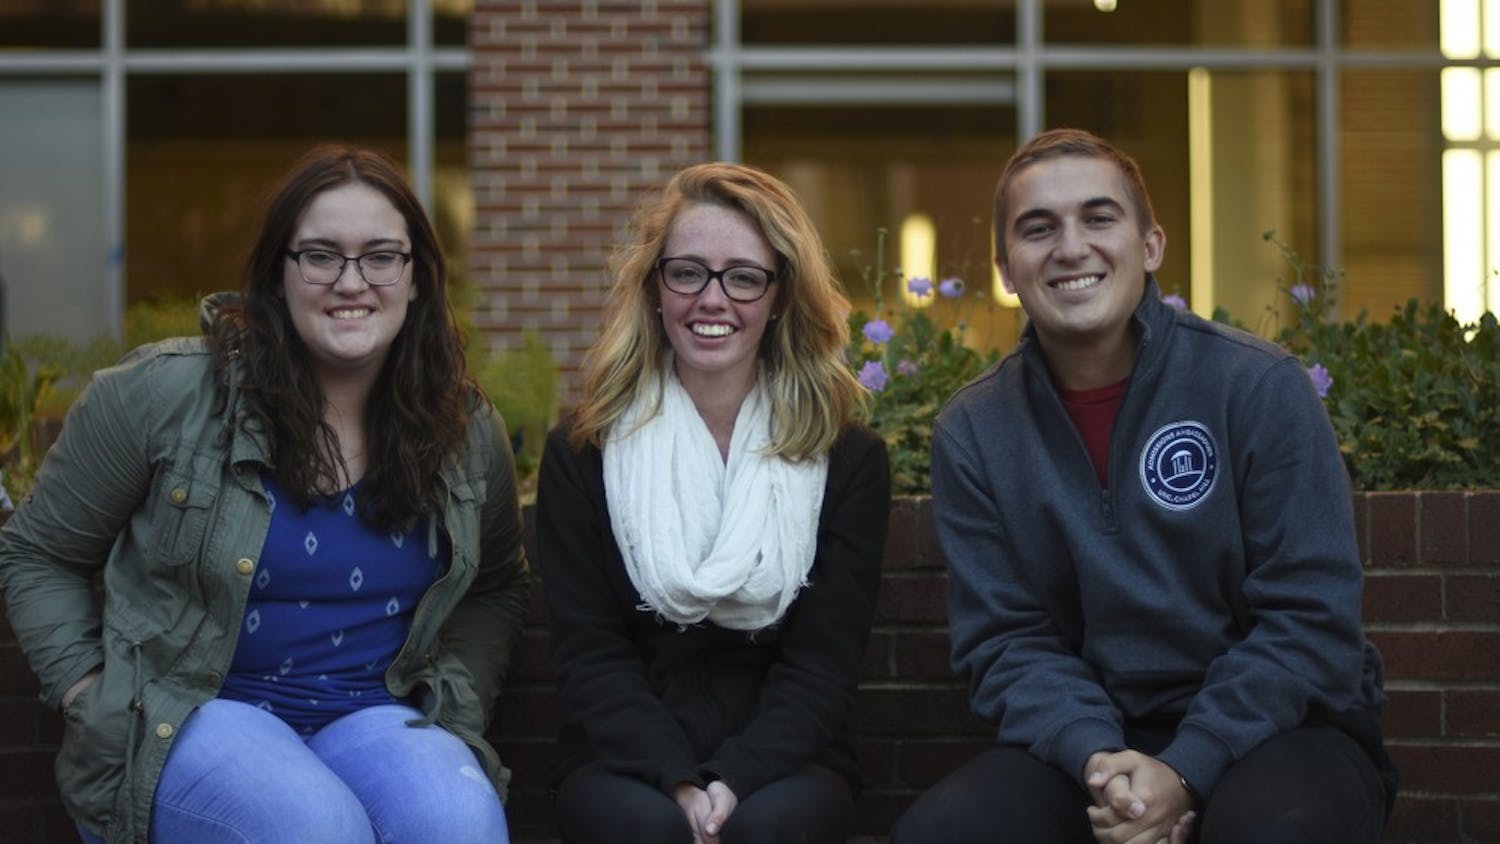 Jamey Cross (right), a first year student and journalism major, Jessica Calland (center), a first year student and biology major, and Chris Sharer, a junior and political science and public policy major, whose hometowns have been affected by the wildfires. 